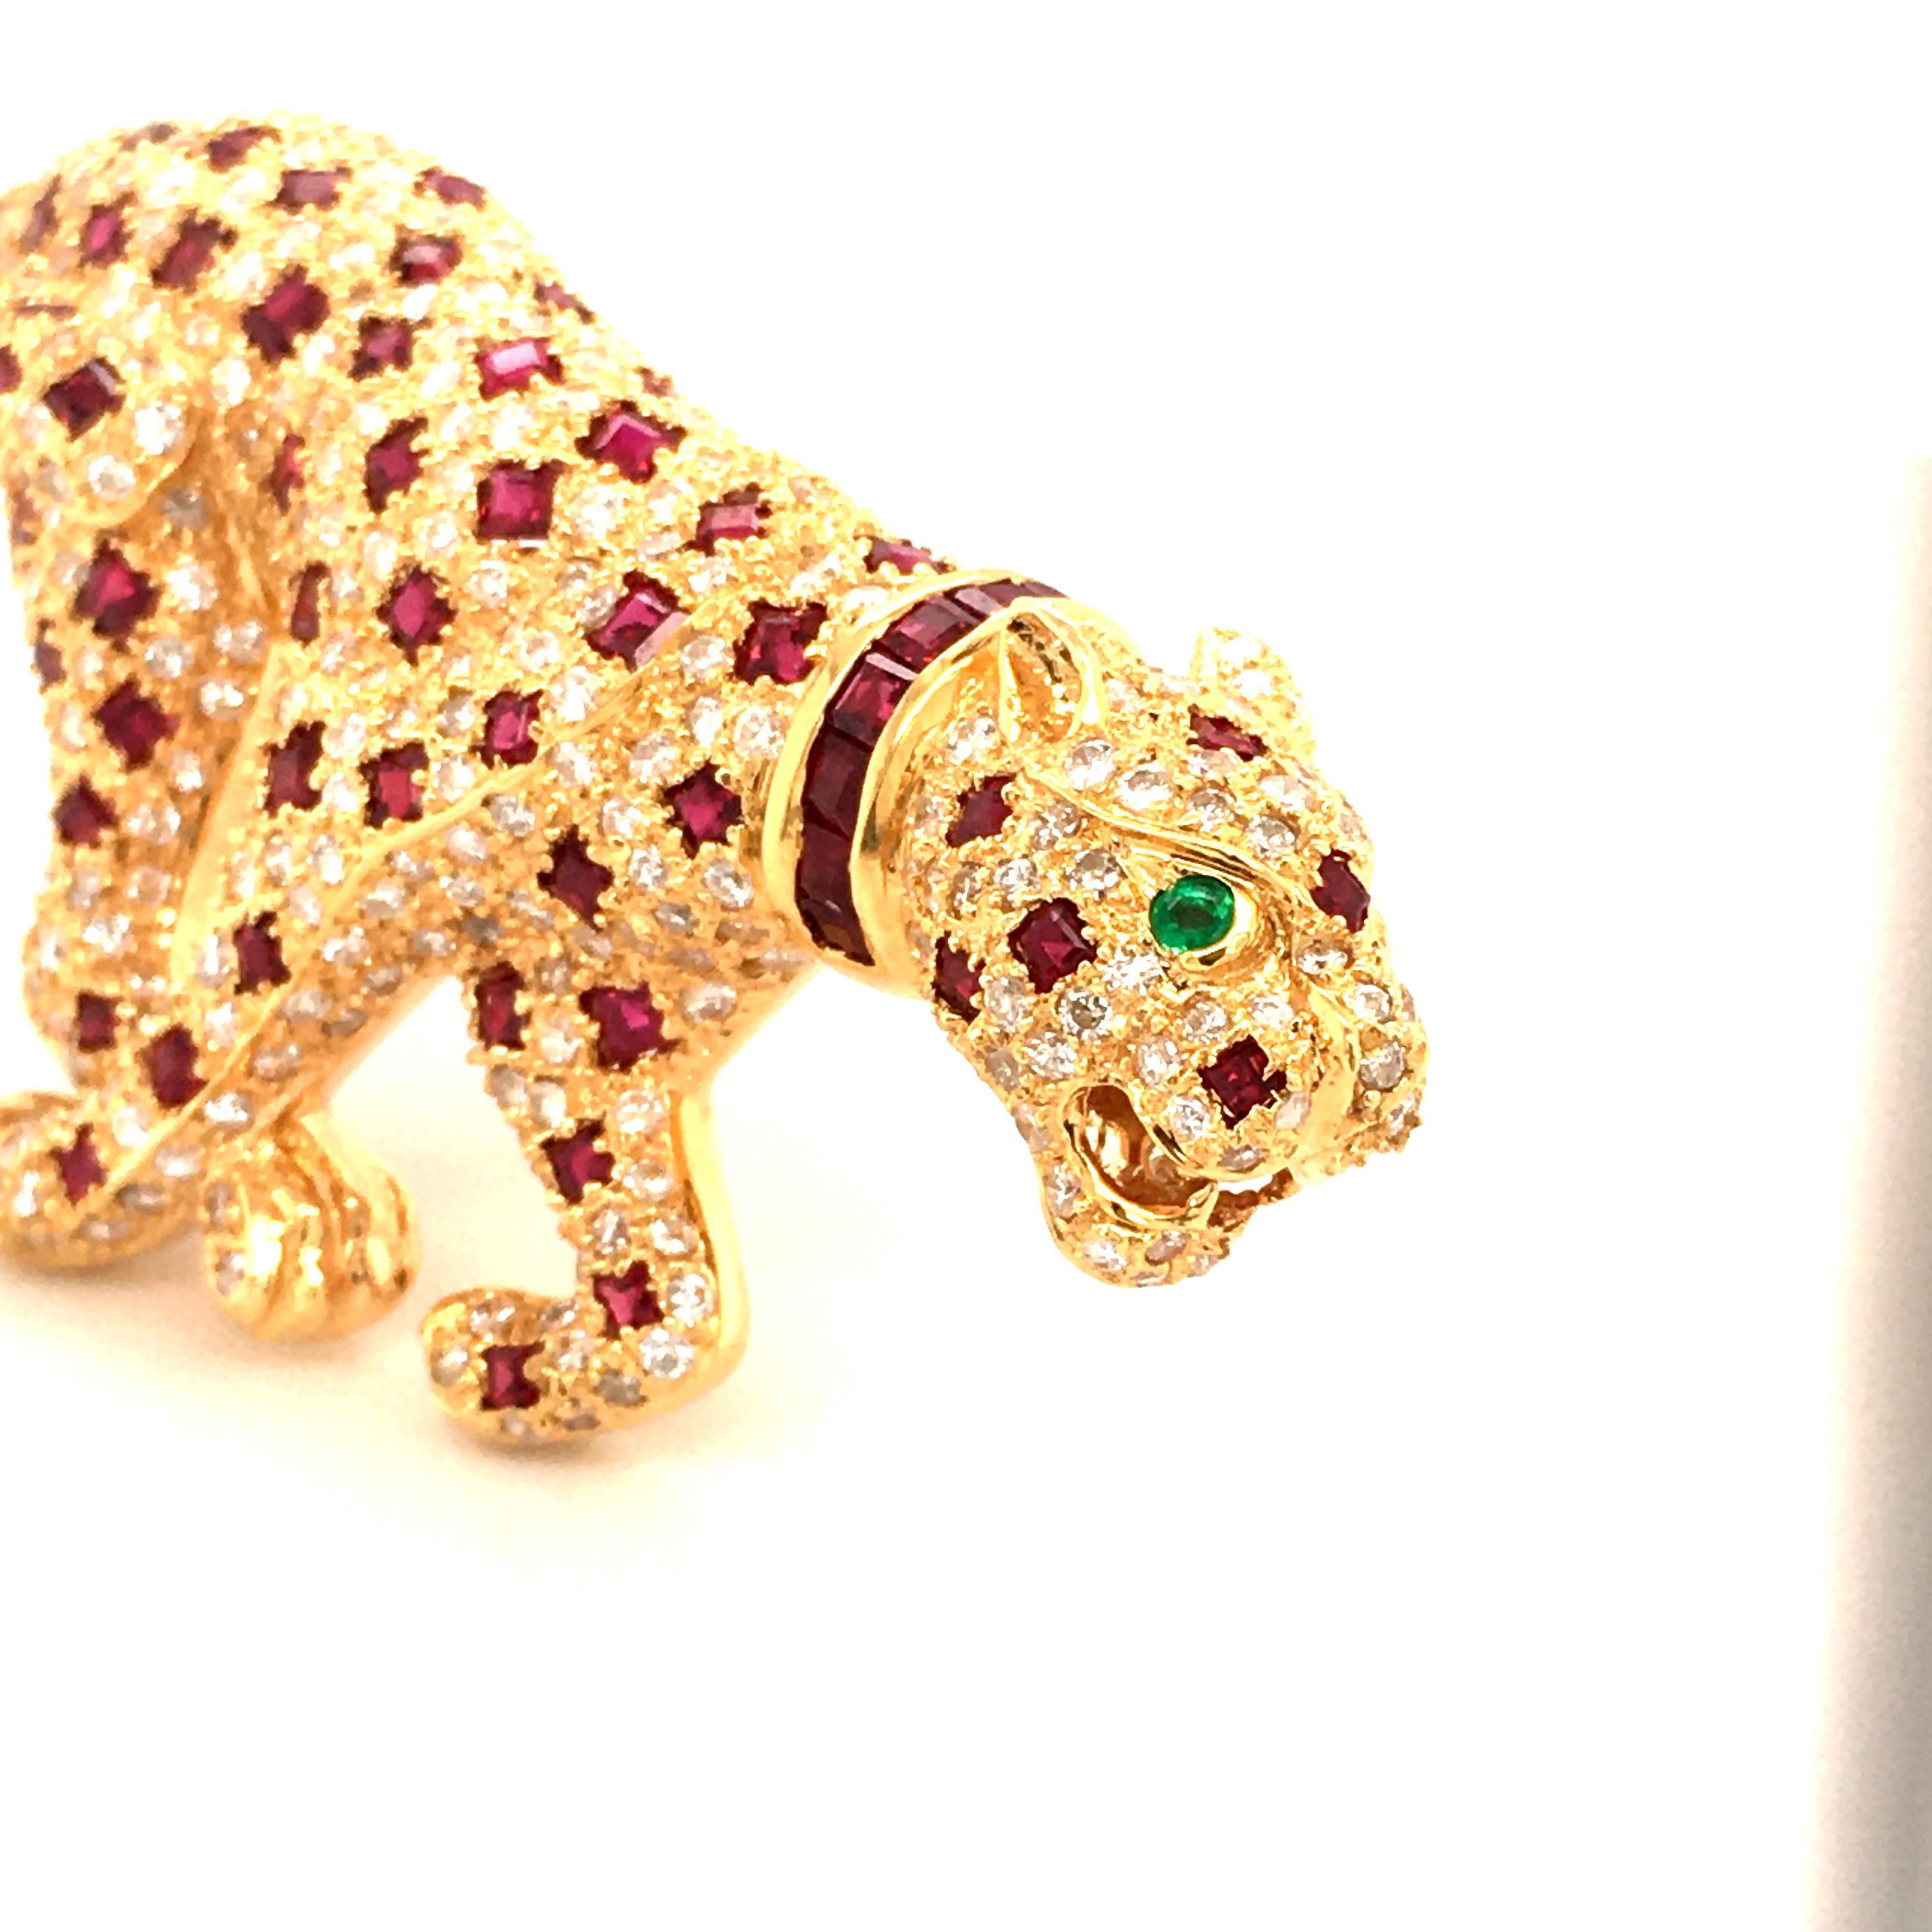 Modern Unique Panther Brooch with Rubies and Diamonds in 18 Karat Yellow Gold